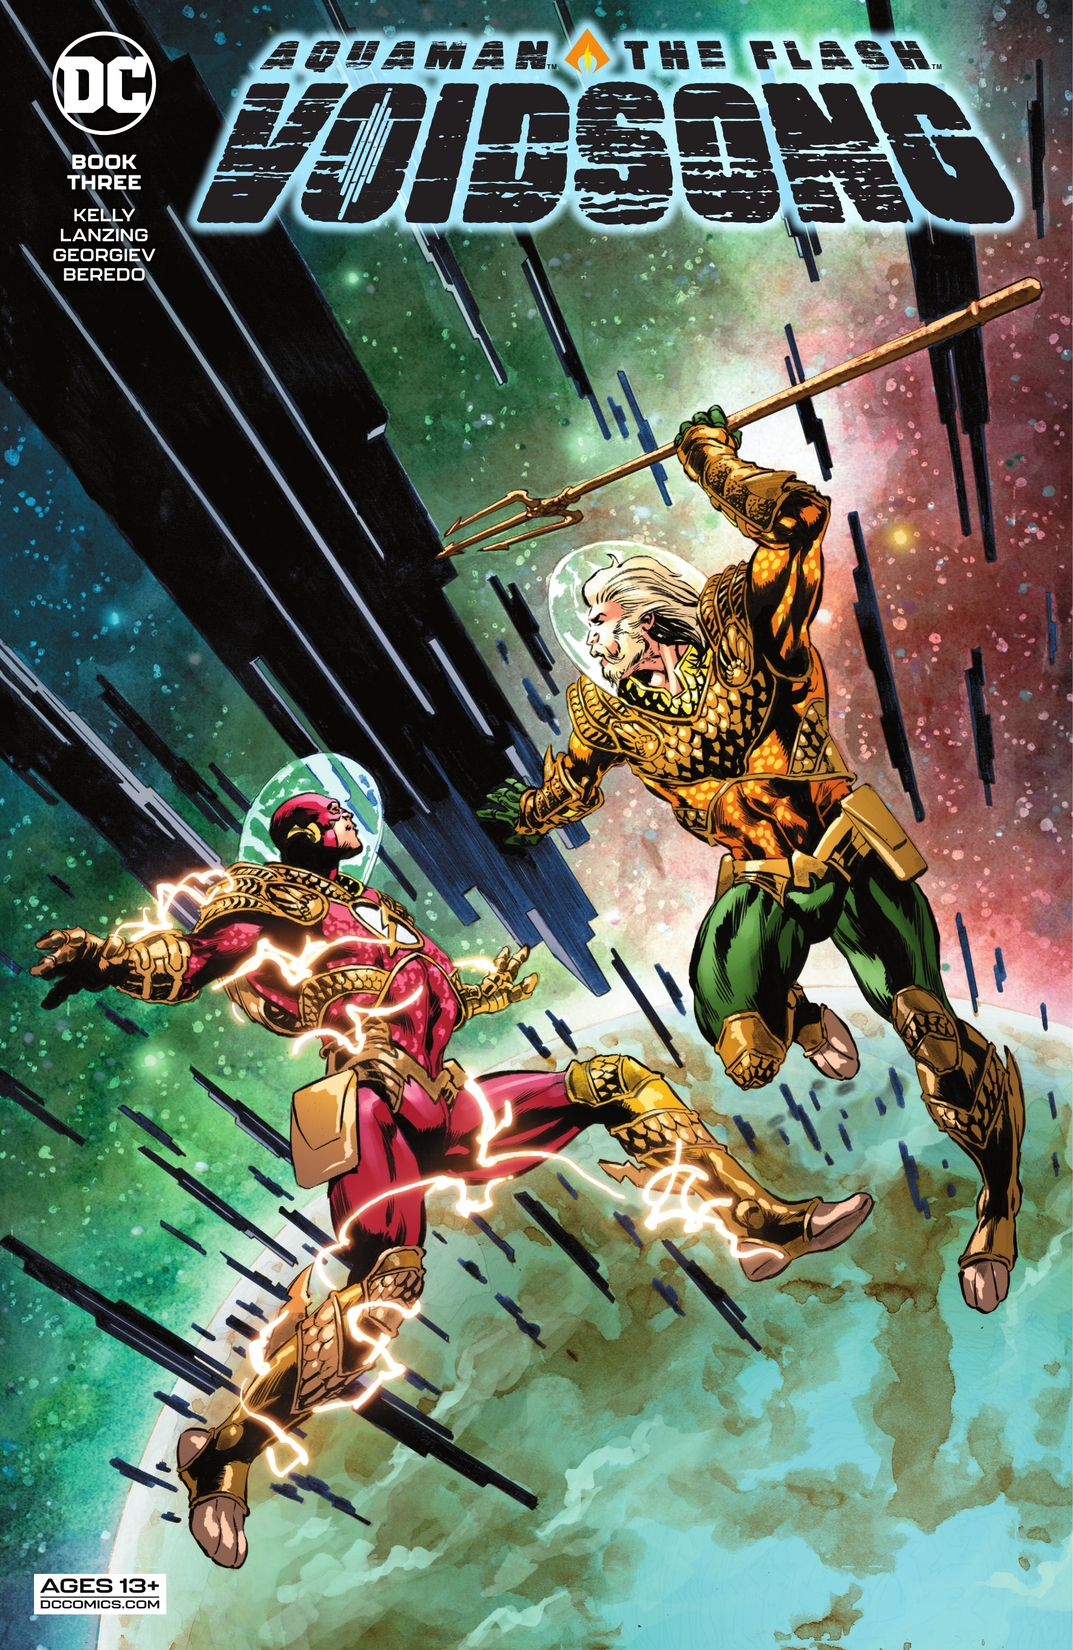 Aquaman & The Flash: Voidsong #3 preview images